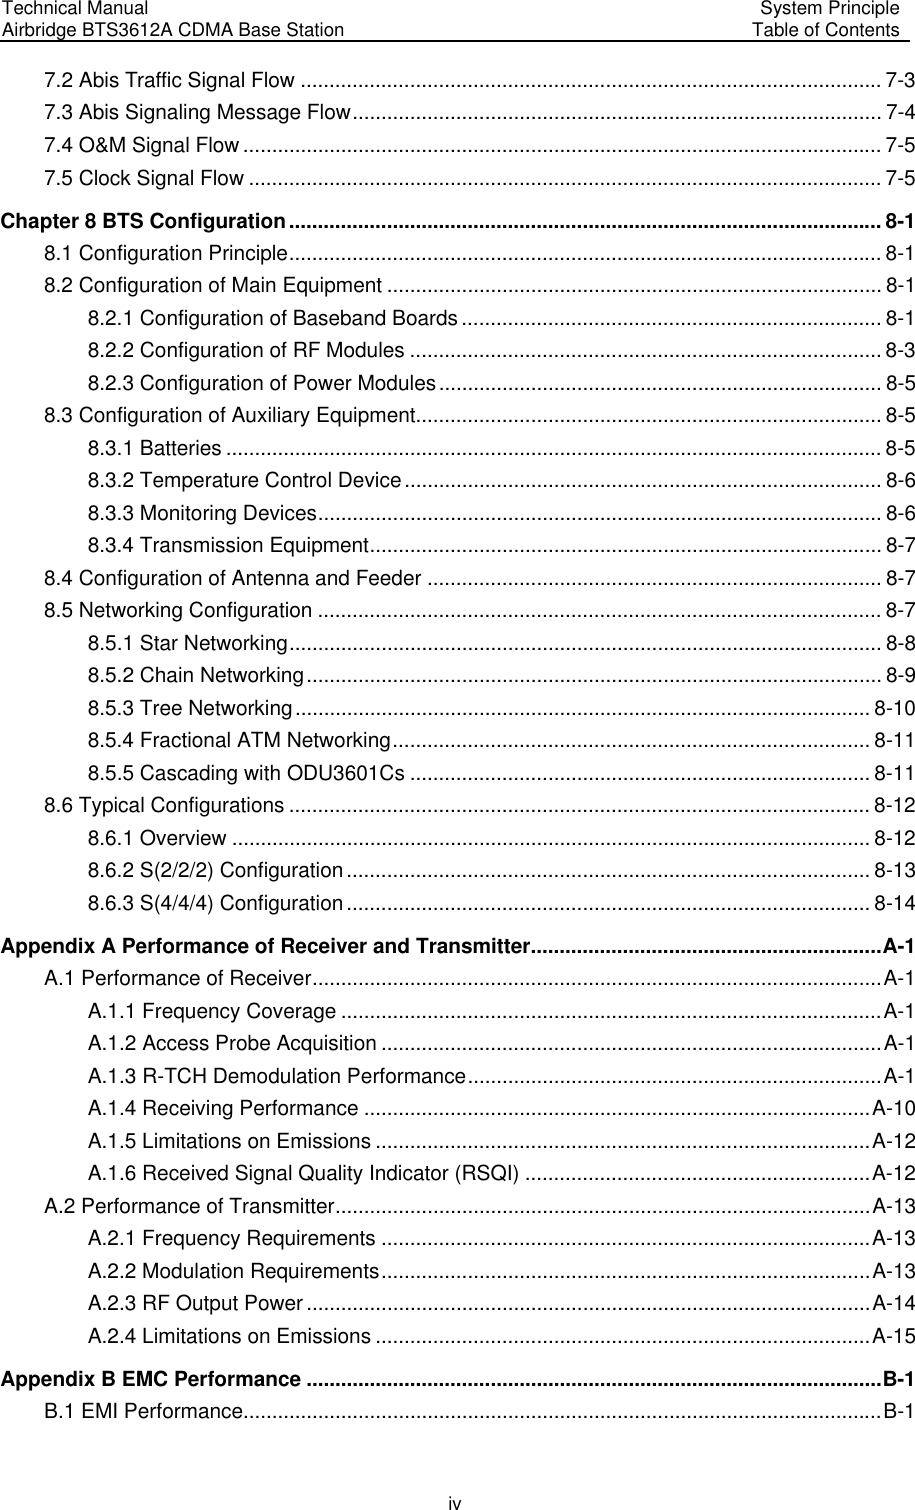 Technical Manual Airbridge BTS3612A CDMA Base Station System Principle Table of Contents  iv 7.2 Abis Traffic Signal Flow ..................................................................................................... 7-3 7.3 Abis Signaling Message Flow............................................................................................ 7-4 7.4 O&amp;M Signal Flow ............................................................................................................... 7-5 7.5 Clock Signal Flow .............................................................................................................. 7-5 Chapter 8 BTS Configuration....................................................................................................... 8-1 8.1 Configuration Principle....................................................................................................... 8-1 8.2 Configuration of Main Equipment ...................................................................................... 8-1 8.2.1 Configuration of Baseband Boards ......................................................................... 8-1 8.2.2 Configuration of RF Modules .................................................................................. 8-3 8.2.3 Configuration of Power Modules............................................................................. 8-5 8.3 Configuration of Auxiliary Equipment................................................................................. 8-5 8.3.1 Batteries .................................................................................................................. 8-5 8.3.2 Temperature Control Device................................................................................... 8-6 8.3.3 Monitoring Devices.................................................................................................. 8-6 8.3.4 Transmission Equipment......................................................................................... 8-7 8.4 Configuration of Antenna and Feeder ............................................................................... 8-7 8.5 Networking Configuration .................................................................................................. 8-7 8.5.1 Star Networking....................................................................................................... 8-8 8.5.2 Chain Networking.................................................................................................... 8-9 8.5.3 Tree Networking.................................................................................................... 8-10 8.5.4 Fractional ATM Networking................................................................................... 8-11 8.5.5 Cascading with ODU3601Cs ................................................................................ 8-11 8.6 Typical Configurations ..................................................................................................... 8-12 8.6.1 Overview ............................................................................................................... 8-12 8.6.2 S(2/2/2) Configuration........................................................................................... 8-13 8.6.3 S(4/4/4) Configuration........................................................................................... 8-14 Appendix A Performance of Receiver and Transmitter.............................................................A-1 A.1 Performance of Receiver...................................................................................................A-1 A.1.1 Frequency Coverage ..............................................................................................A-1 A.1.2 Access Probe Acquisition .......................................................................................A-1 A.1.3 R-TCH Demodulation Performance........................................................................A-1 A.1.4 Receiving Performance ........................................................................................A-10 A.1.5 Limitations on Emissions ......................................................................................A-12 A.1.6 Received Signal Quality Indicator (RSQI) ............................................................A-12 A.2 Performance of Transmitter.............................................................................................A-13 A.2.1 Frequency Requirements .....................................................................................A-13 A.2.2 Modulation Requirements.....................................................................................A-13 A.2.3 RF Output Power ..................................................................................................A-14 A.2.4 Limitations on Emissions ......................................................................................A-15 Appendix B EMC Performance ....................................................................................................B-1 B.1 EMI Performance...............................................................................................................B-1 